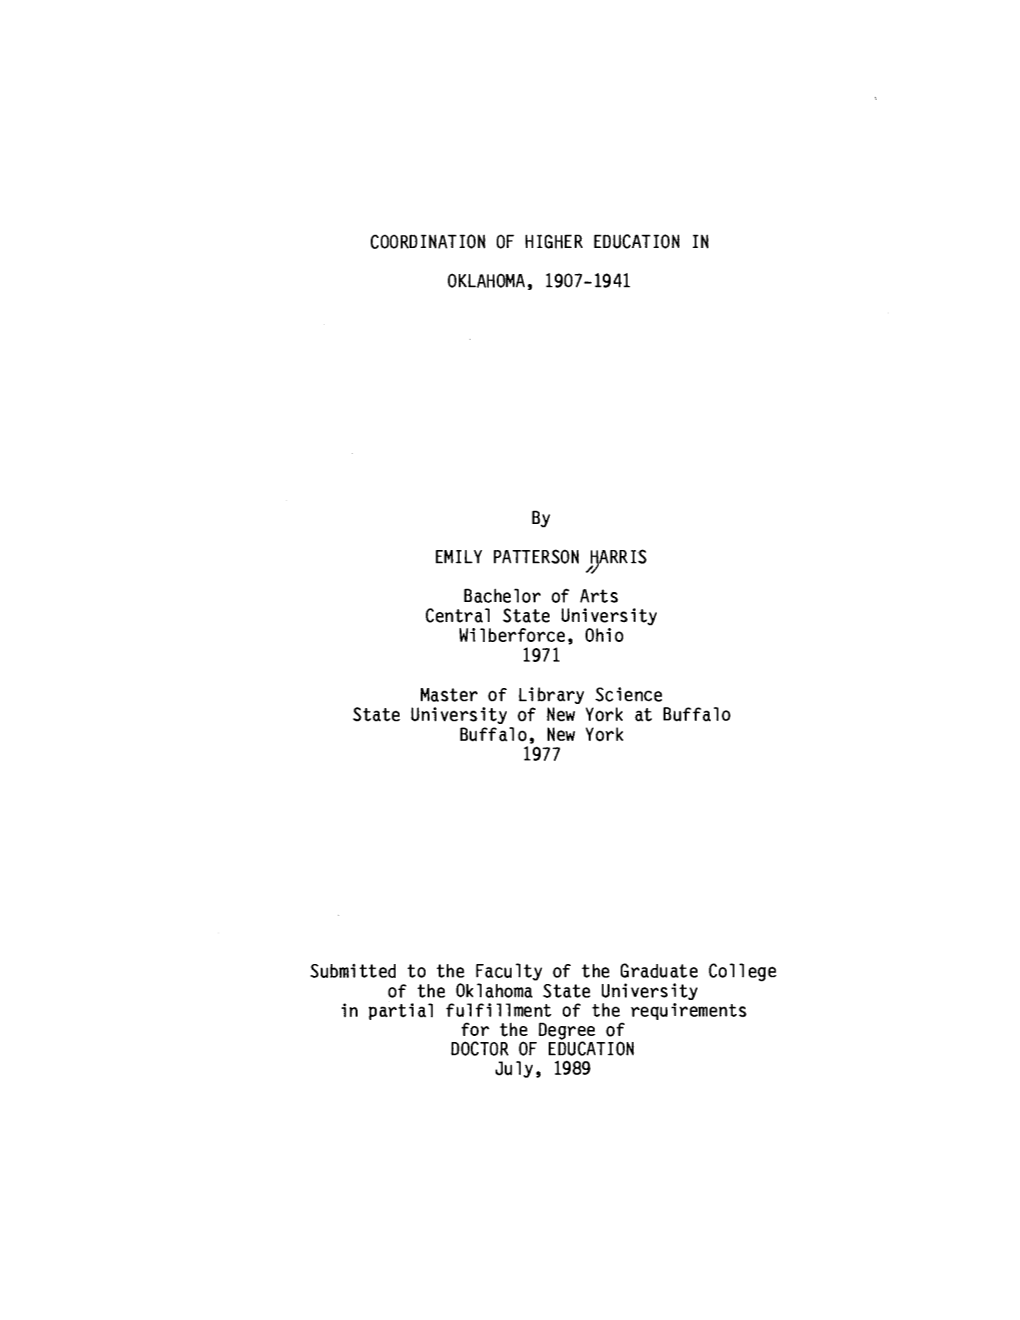 Coordination of Higher Education in Oklahoma, 1907-1941